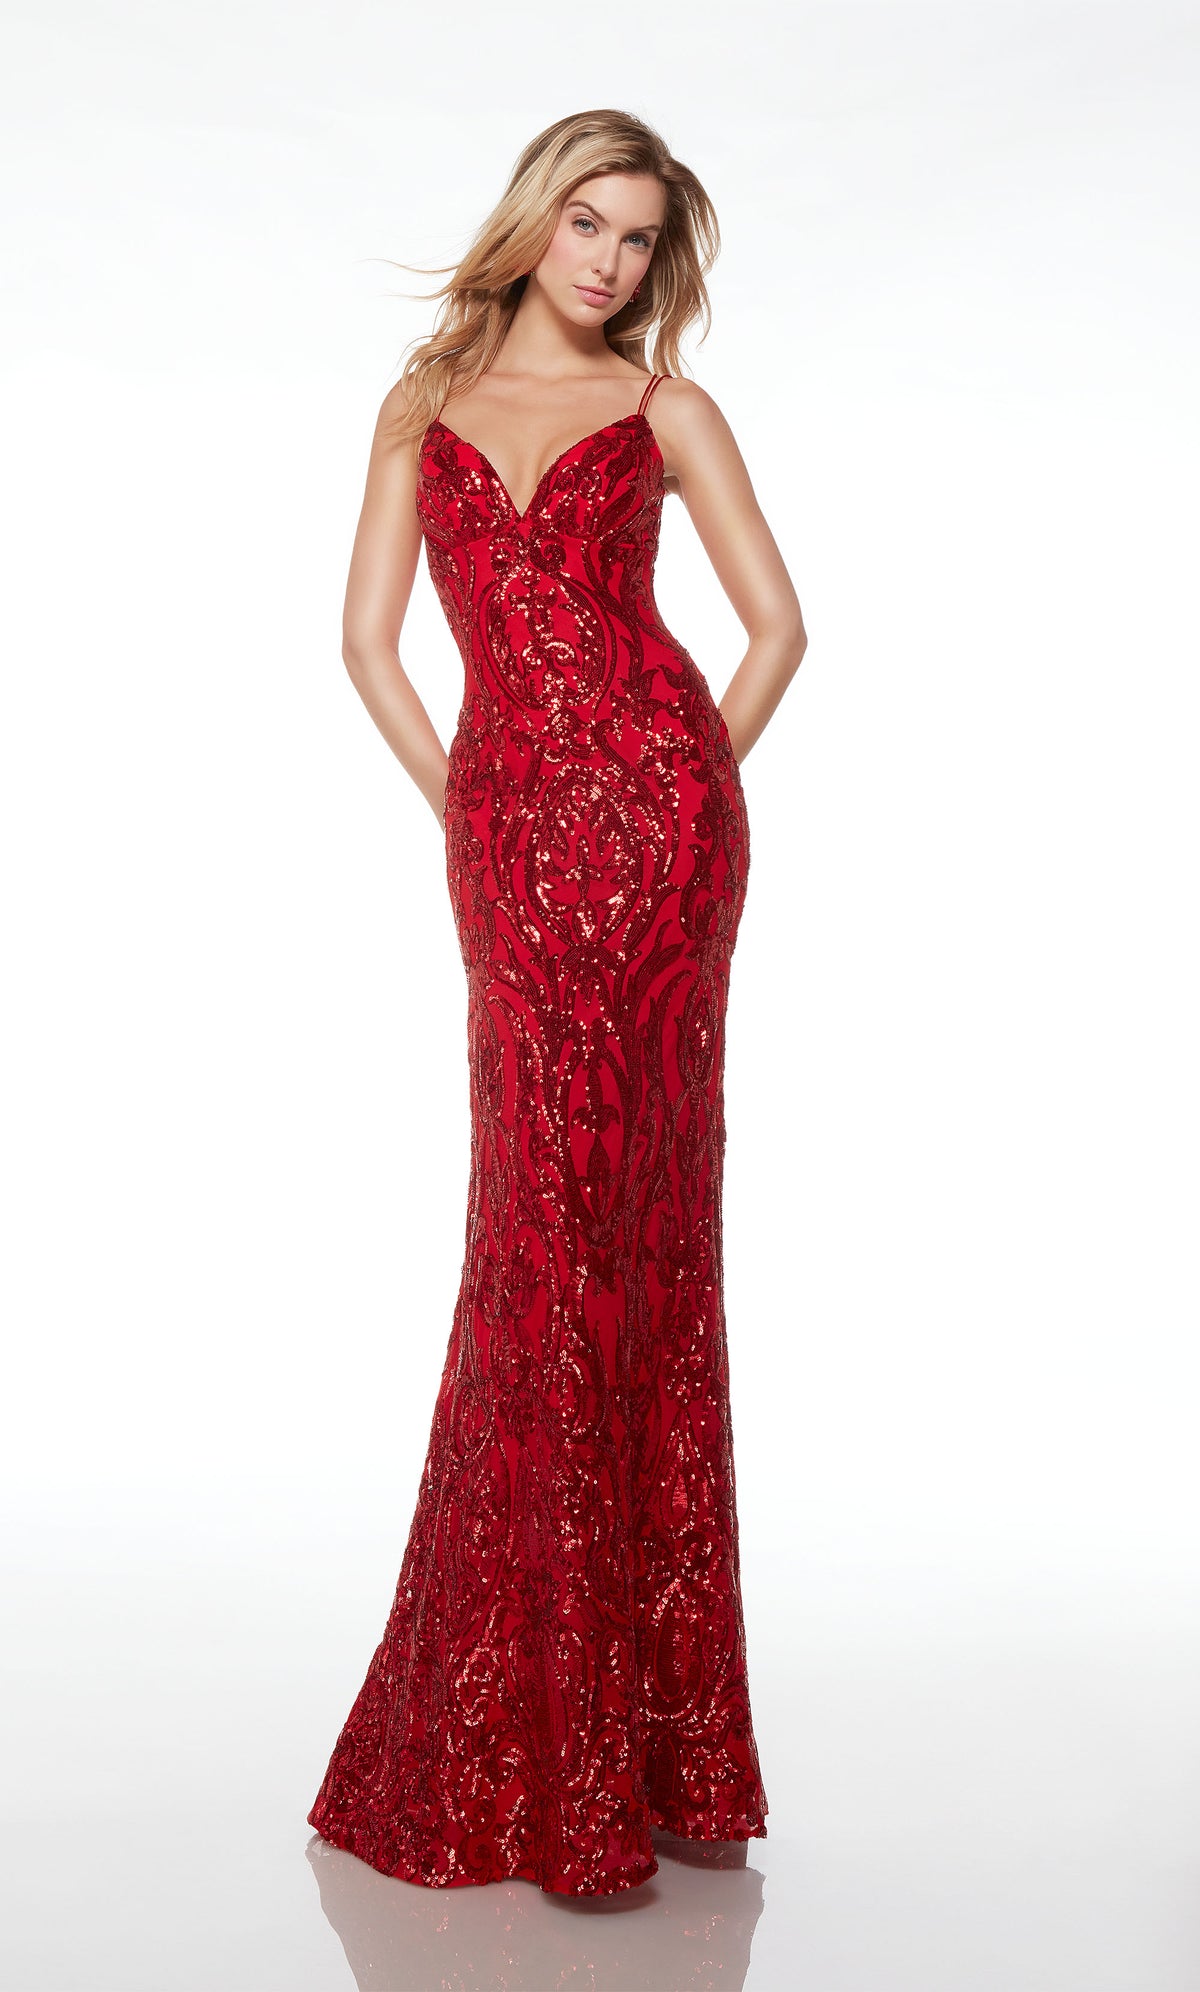 Fit-and-flare red prom dress with V neckline, dual spaghetti straps, lace-up back, and an train, featuring an gorgeous paisley-patterned design.